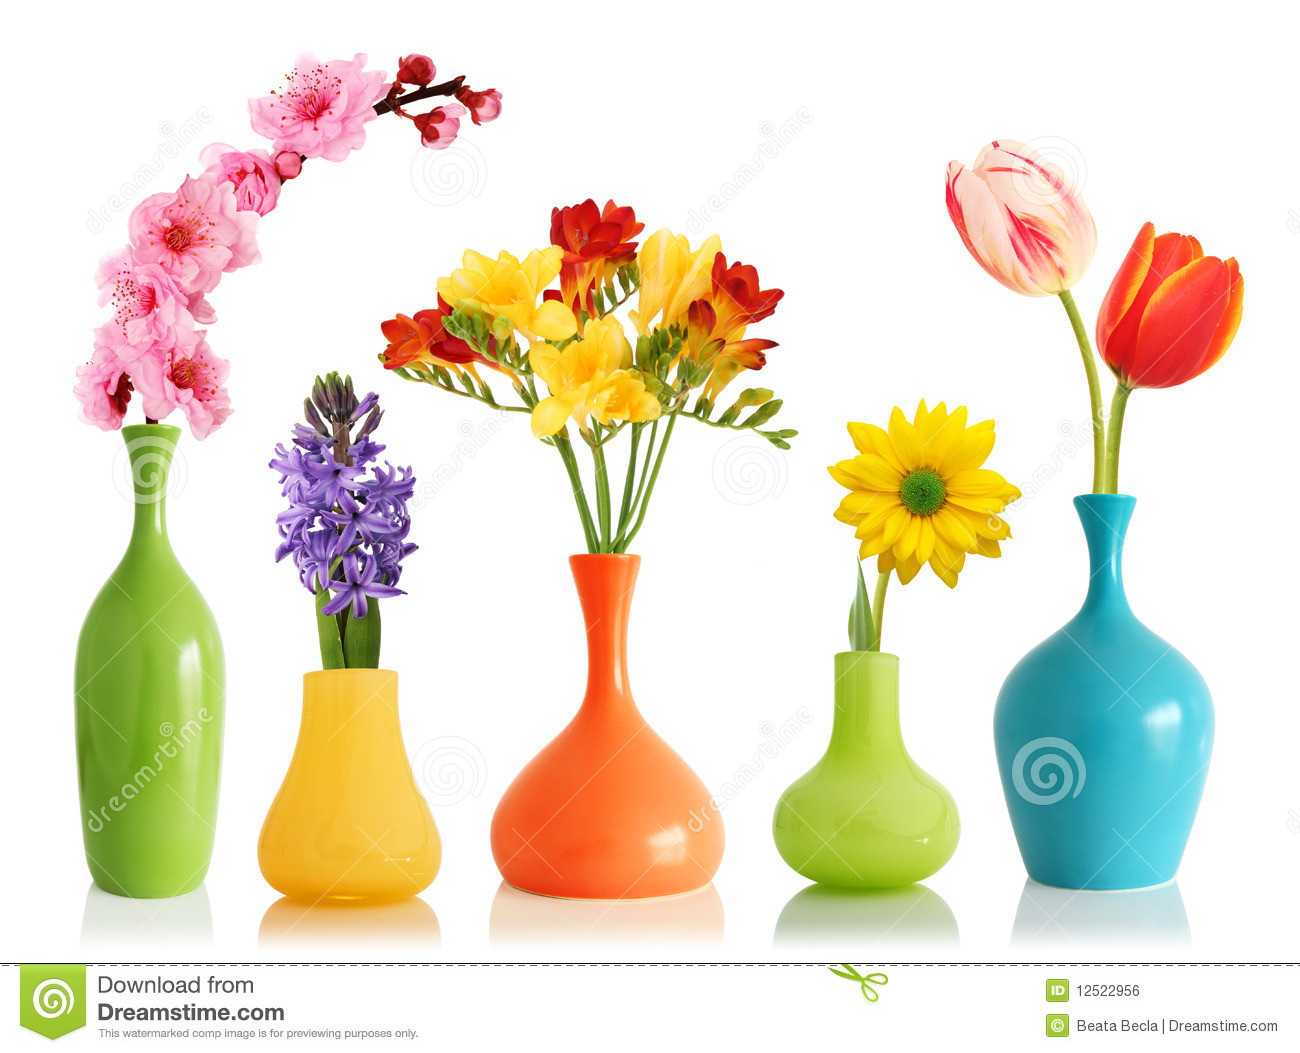 16 Ideal Small Glass Vase with Flowers 2024 free download small glass vase with flowers of spring flowers in vases stock photo image of gerber 12522956 regarding spring flowers in vases